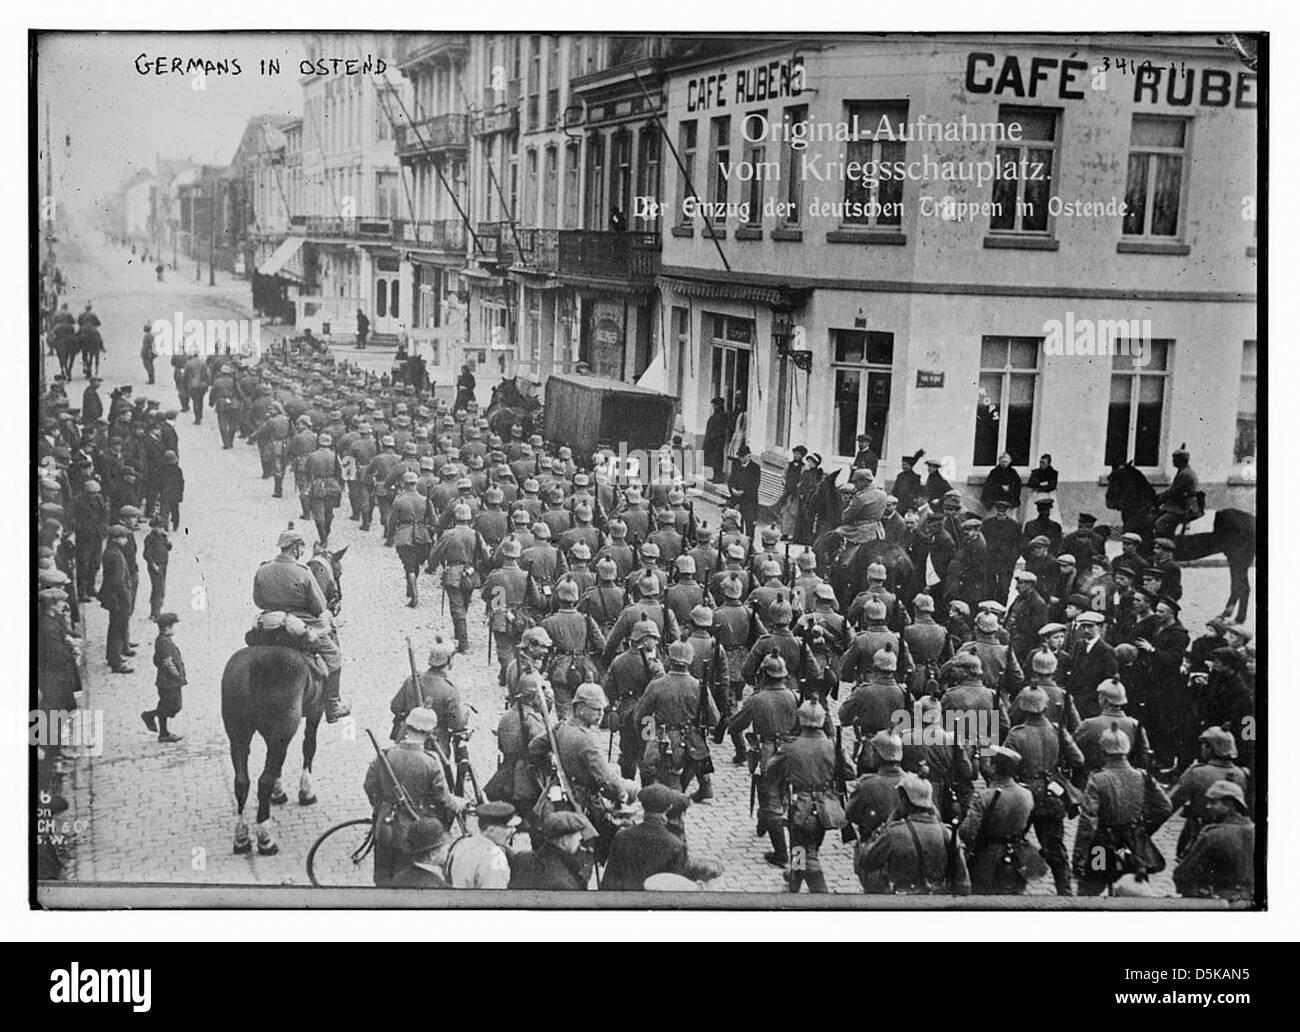 Germans in Ostend (LOC) Stock Photo